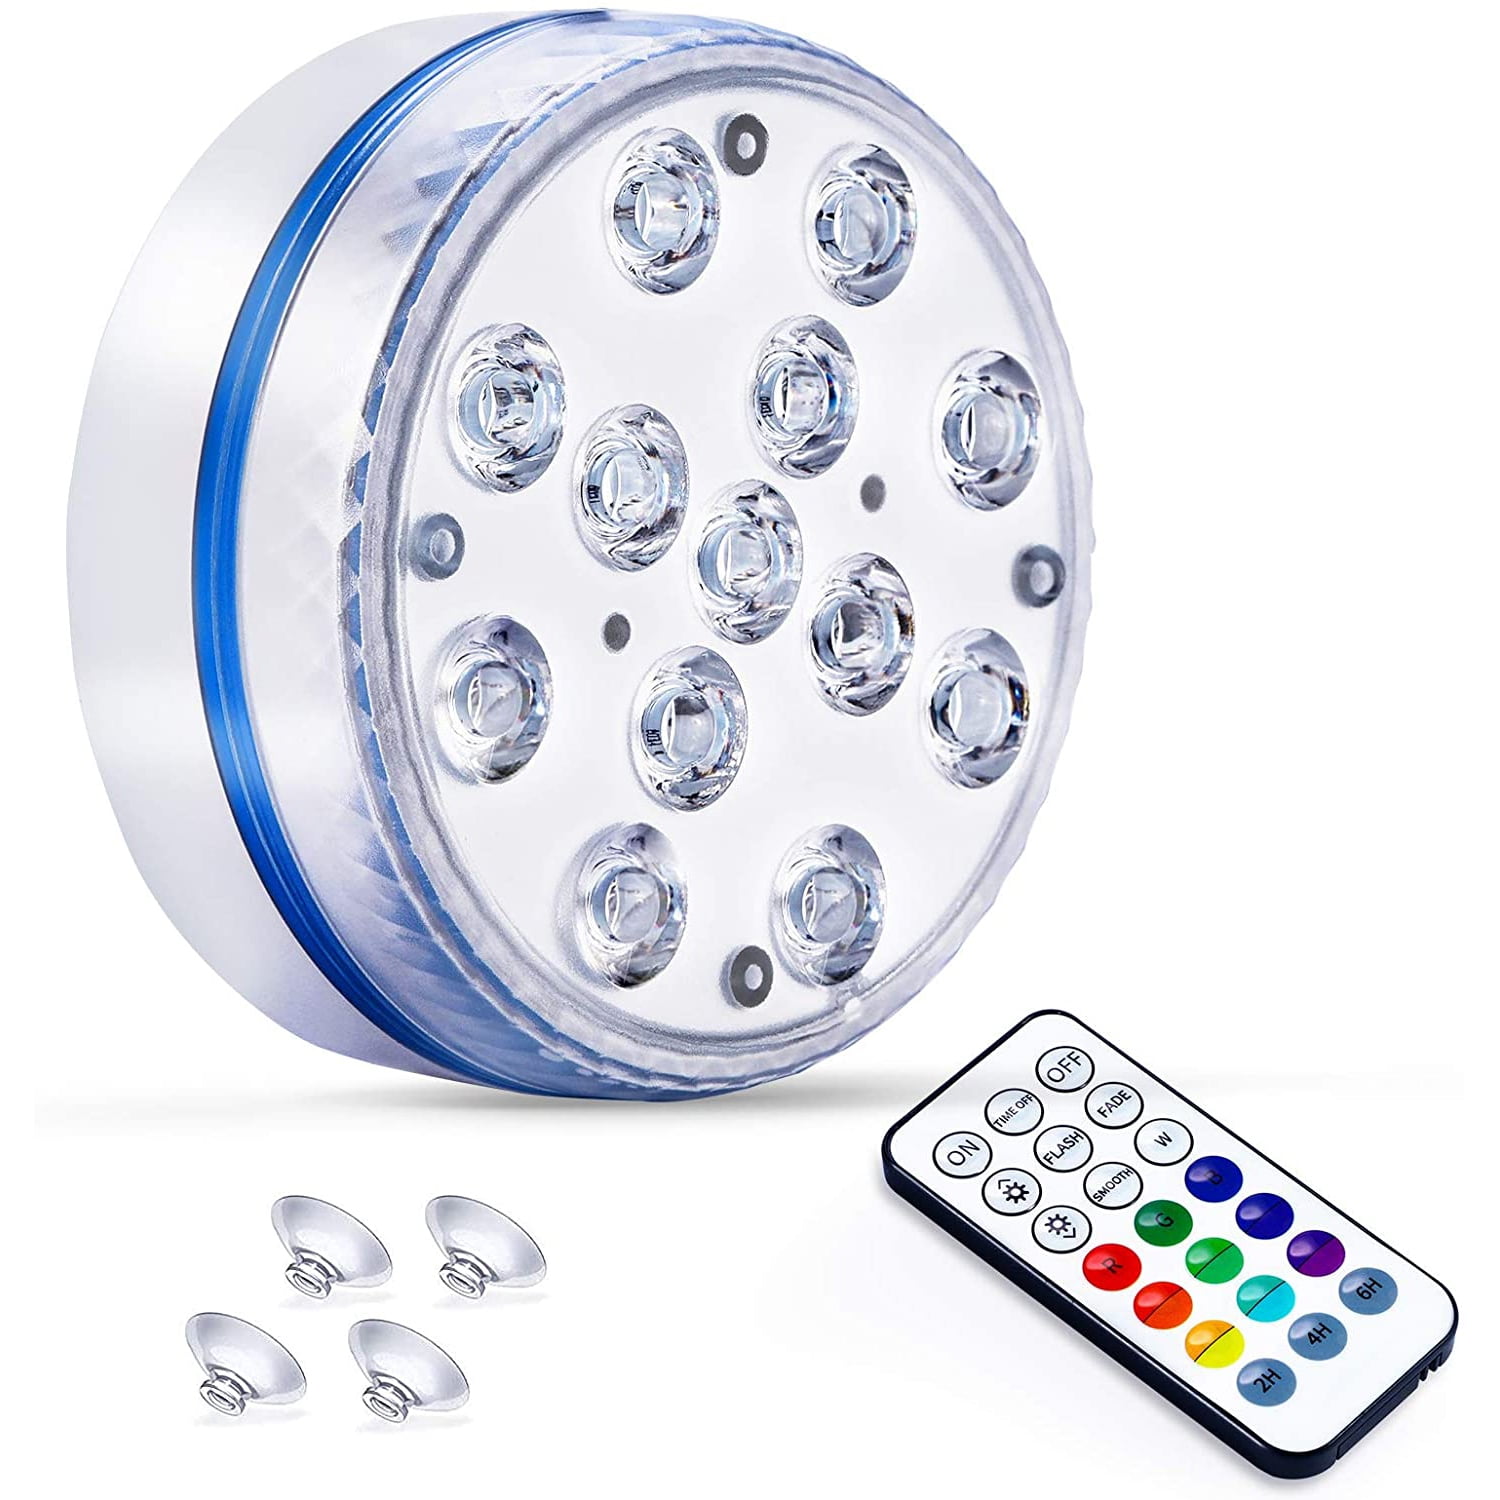 SunMe Submersible LED Light WaterProof IP68 Inground Pool Light with RF Remote 16 RGB Color 13 Extra Bright LED with Magnets/Suction Cups Battery Operated UnderWater Light for Aquarium/Pond/Pool 2 